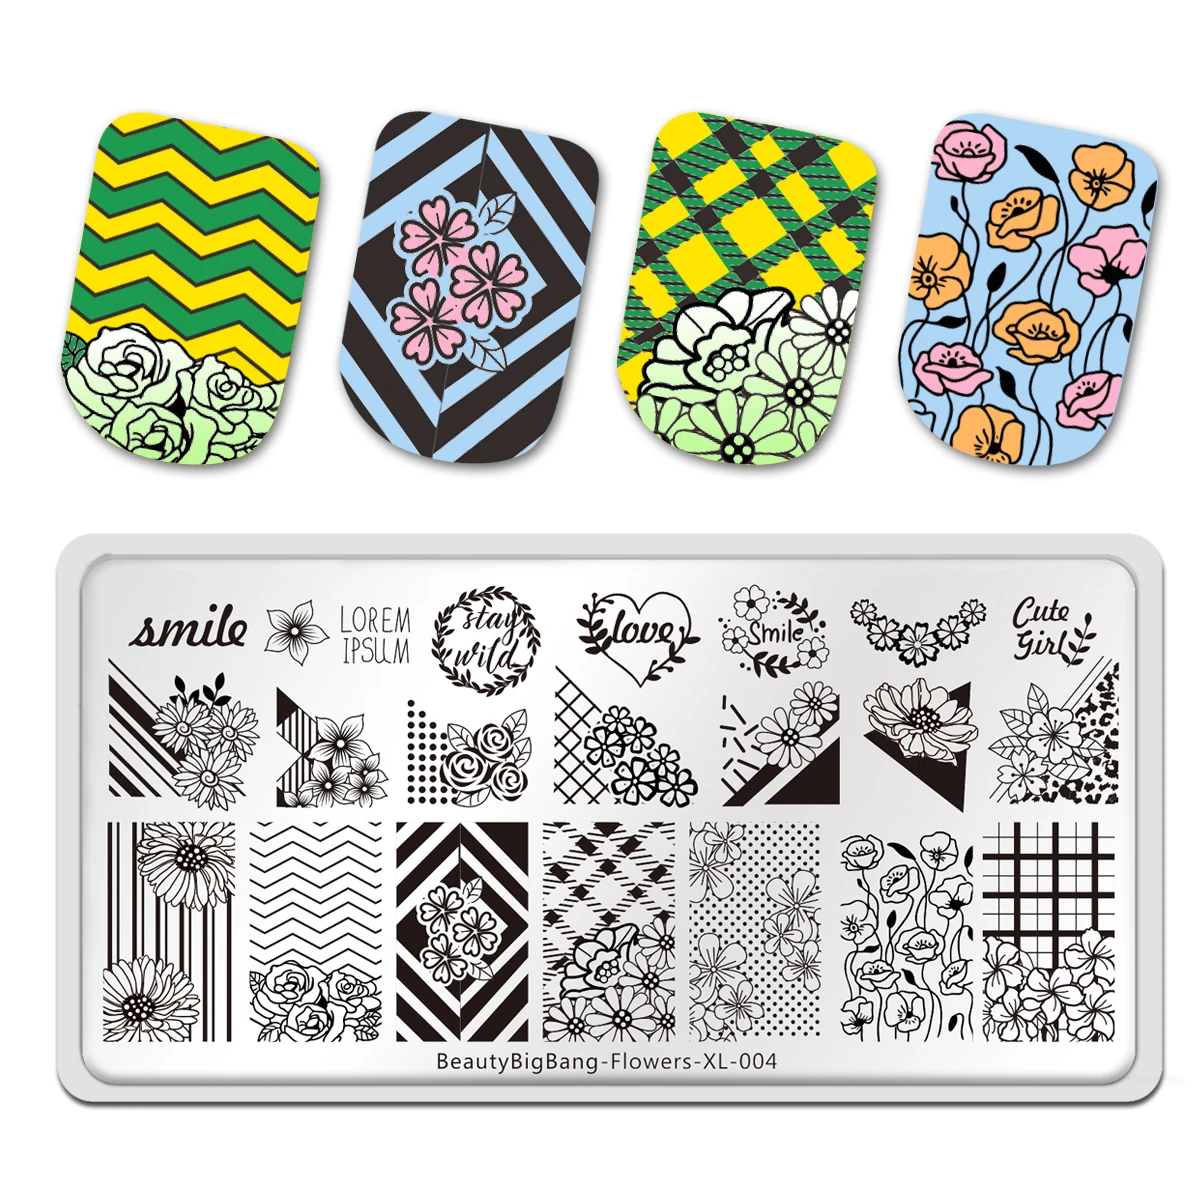 

BeautyBigBang Stamping Plates Flower XL-004 Smile Love Geometry Image Stainless Steel 12*6cm Nail Art Stencil Stamp Template